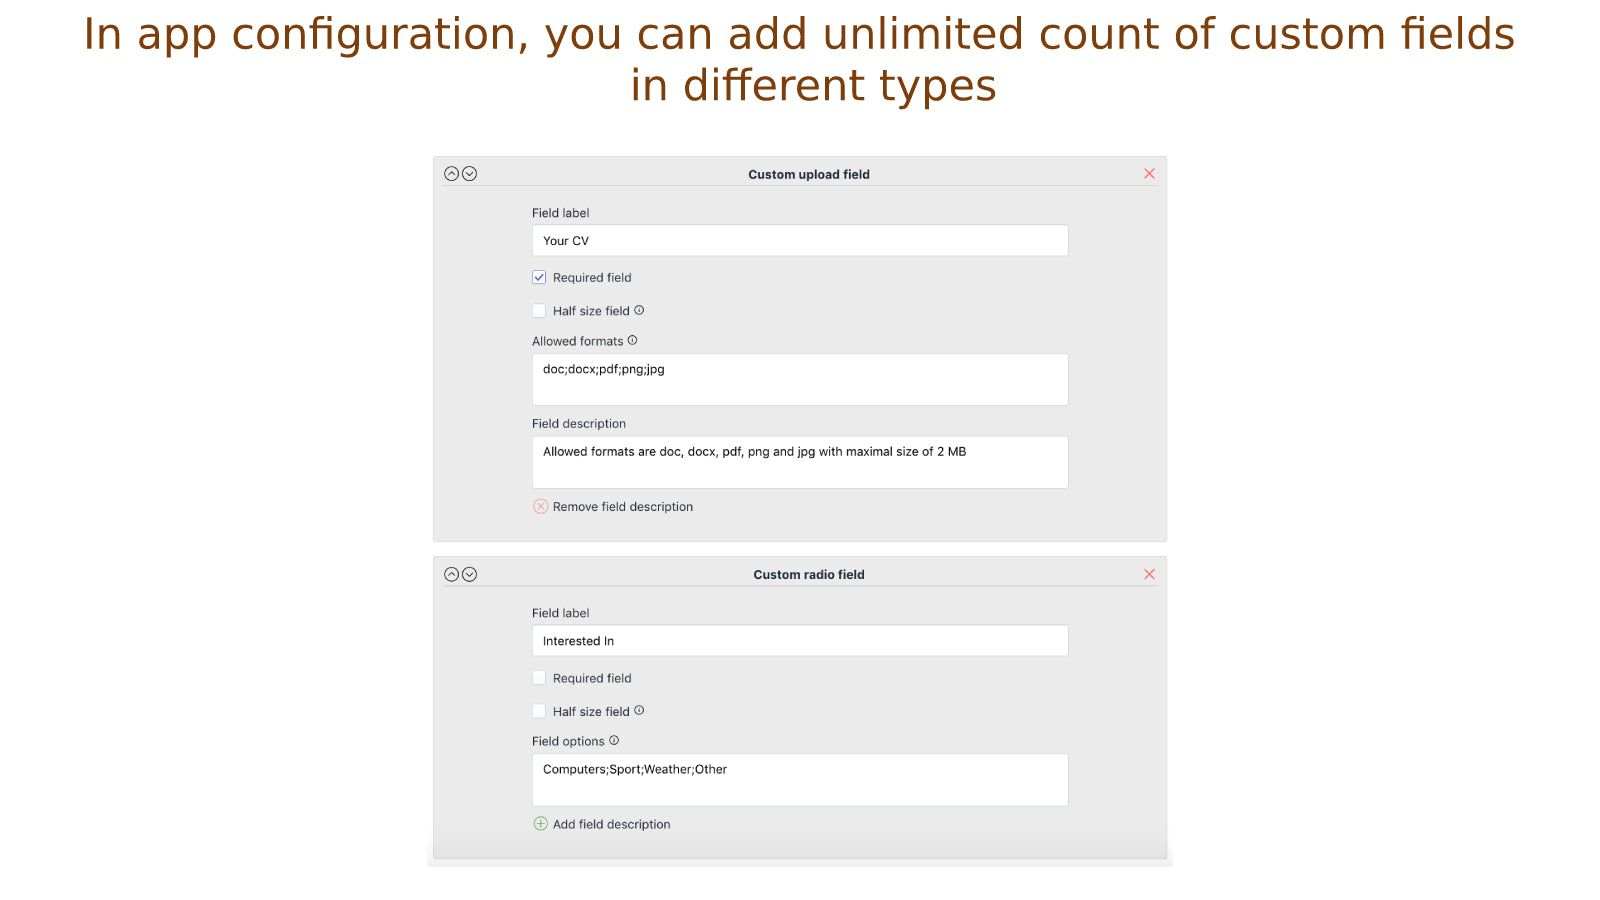 In app configuration you can add unlimited custom fields